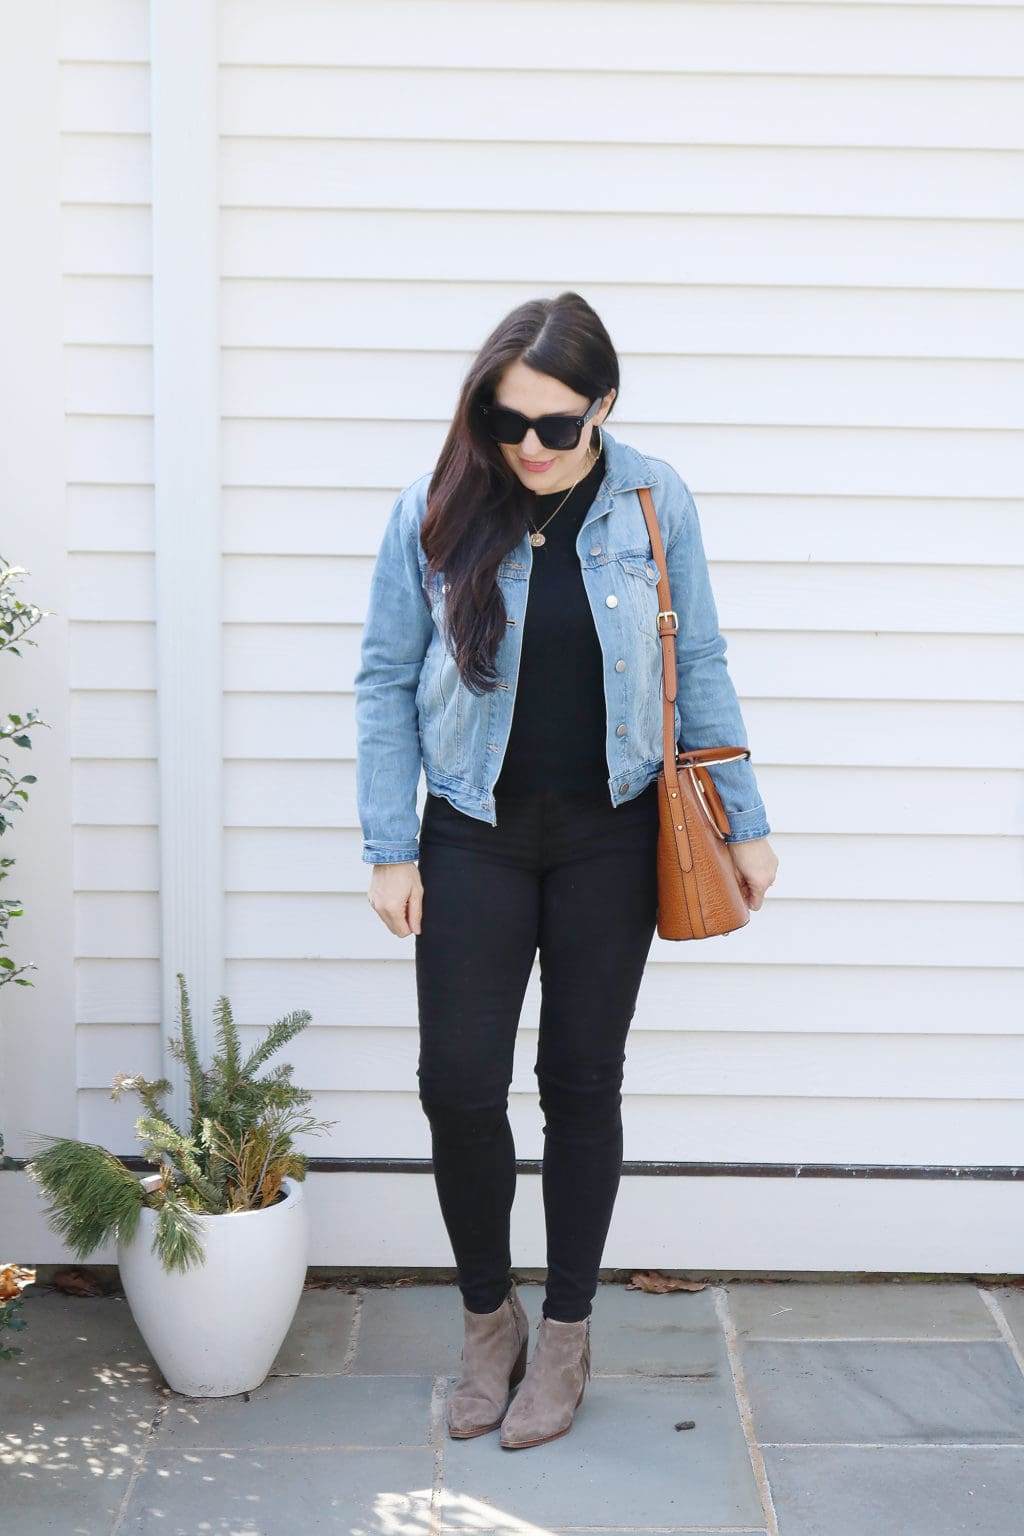 4 Jean Jacket Outfit Ideas - Darling Darleen | A Lifestyle Design Blog